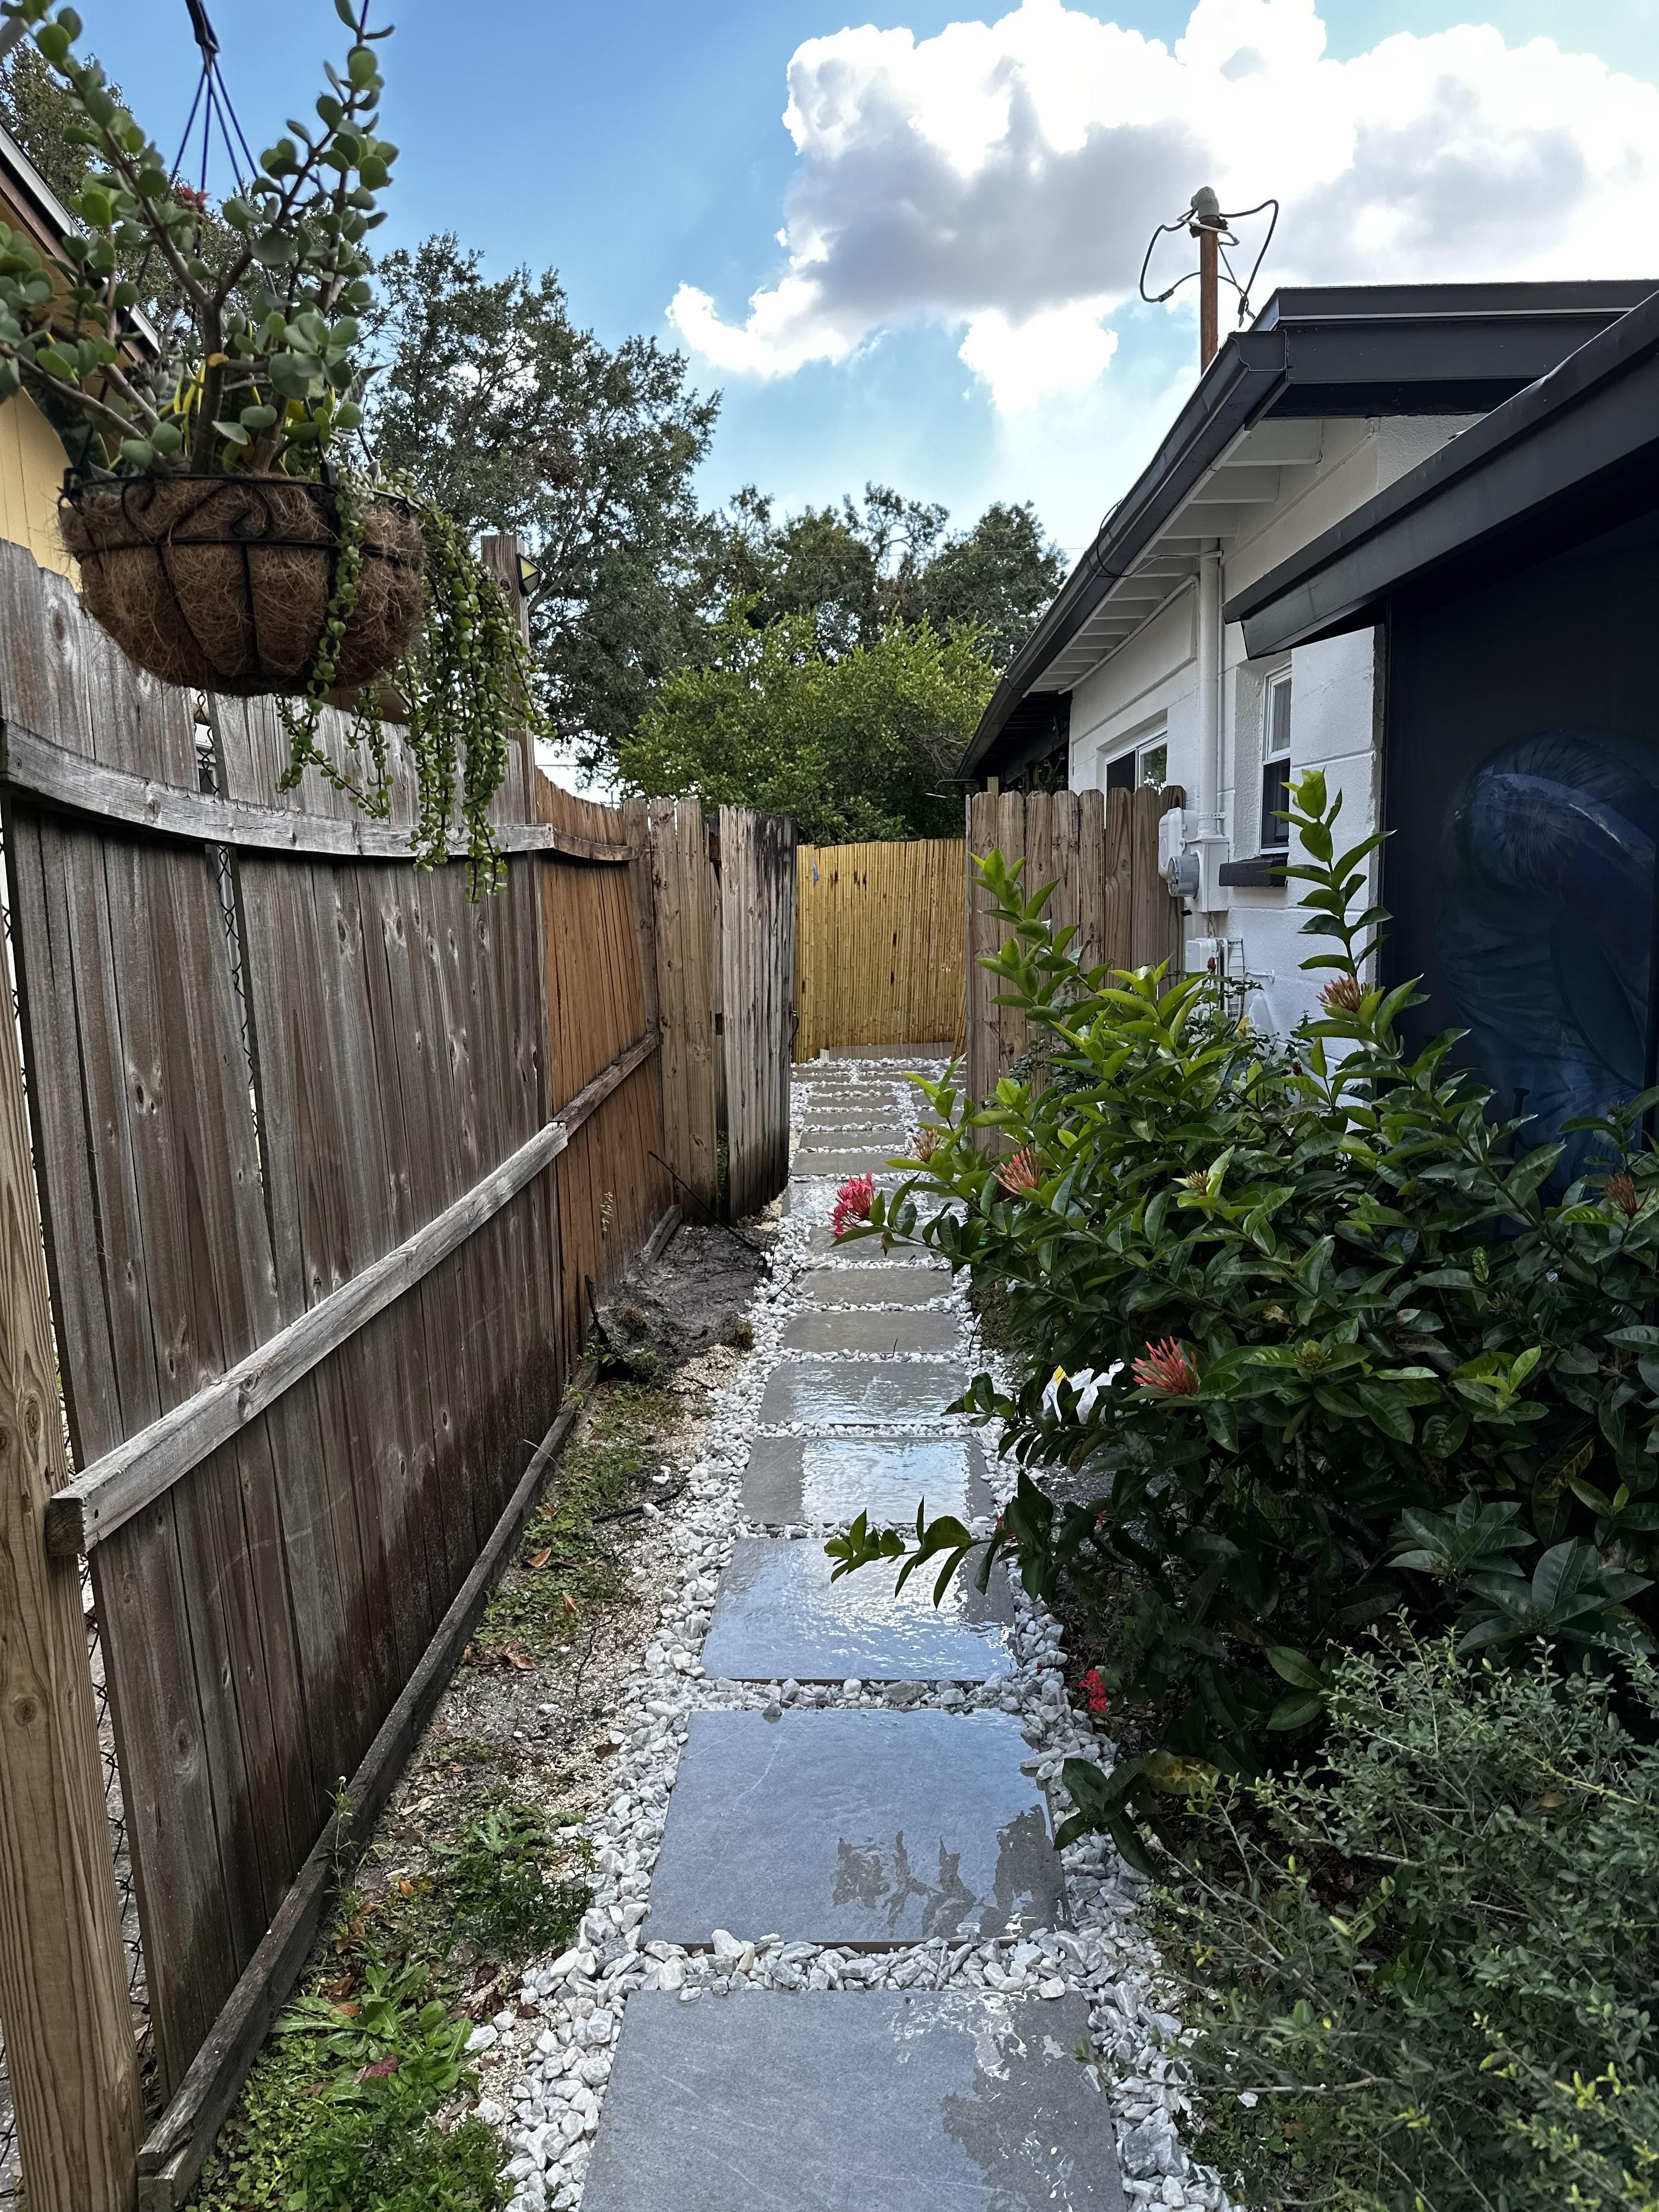 All Photos for Citrus Property Maintenance in Inverness, FL